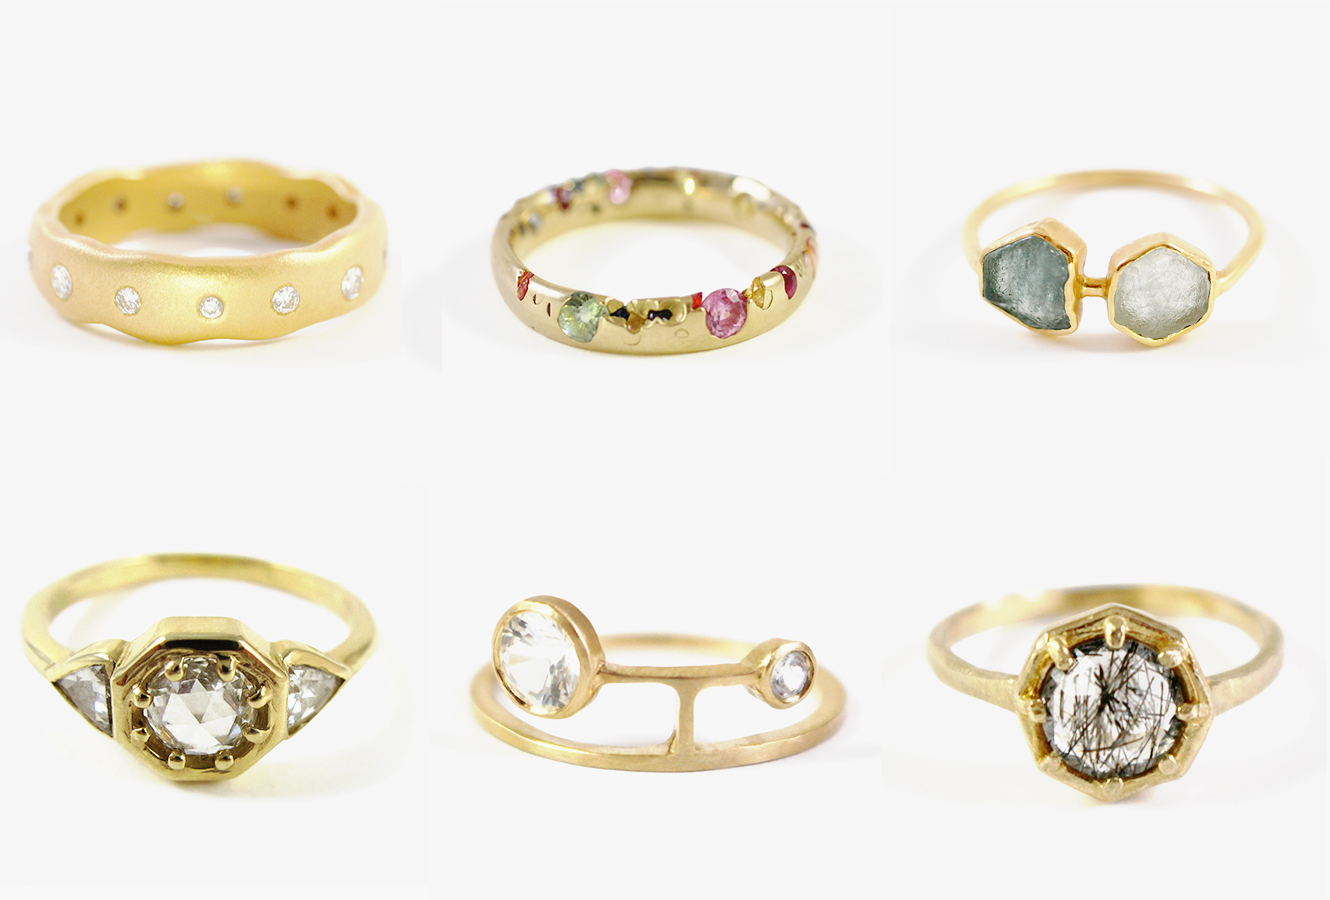 New Stone Age Has the Indie Wedding Jewelry You've Been Looking For | A ...